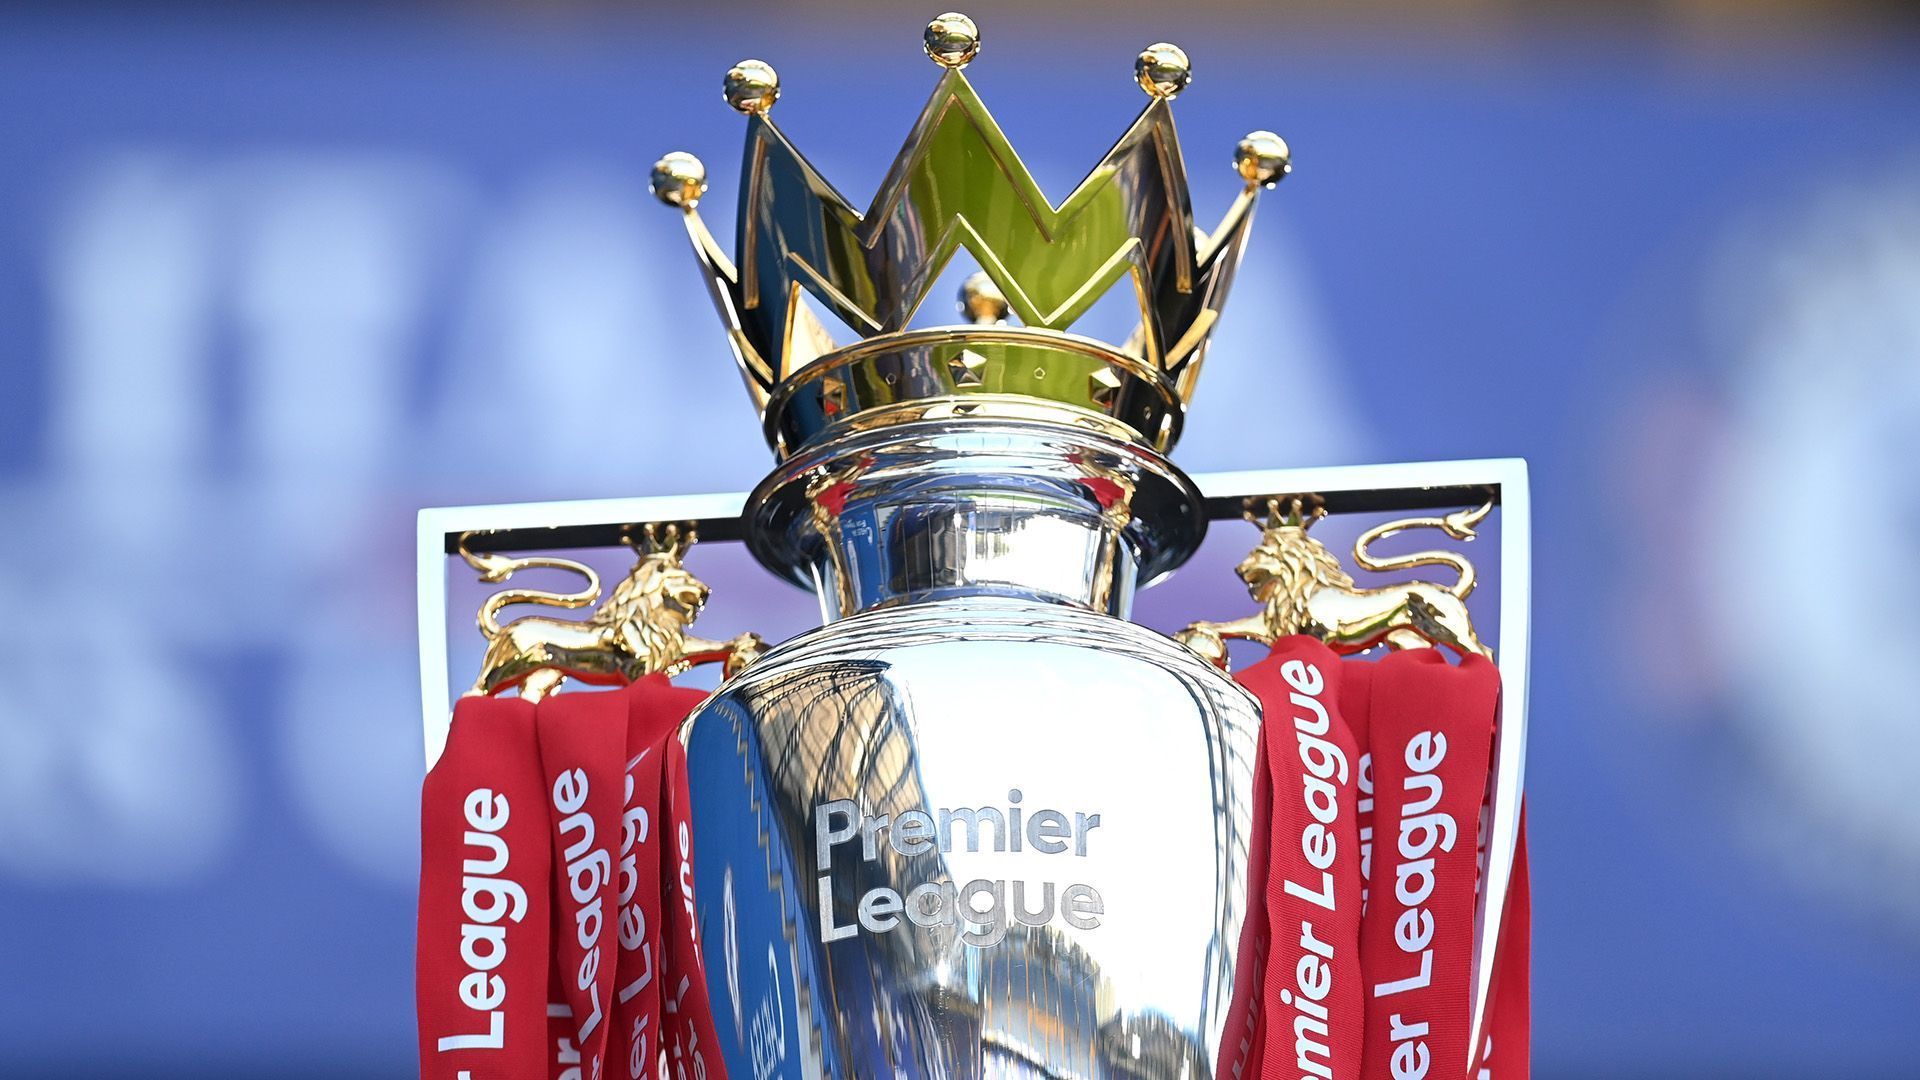 Premier League resumes on 20th November after the International break